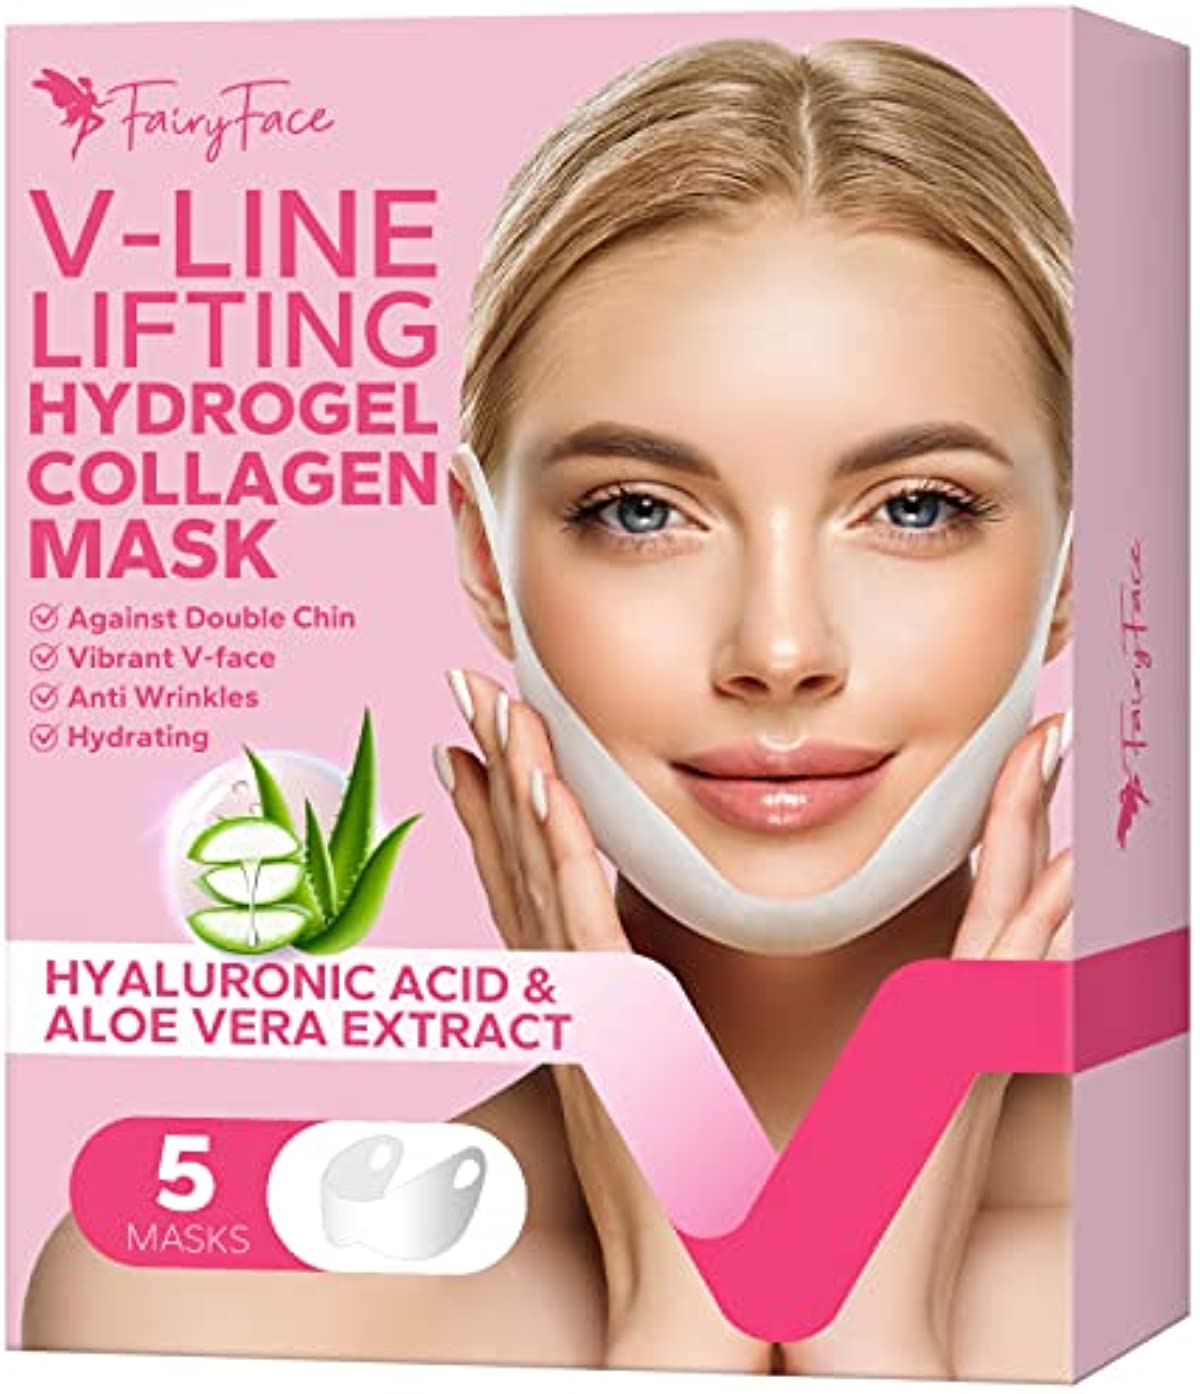 FairyFace V Line Shaping Face Masks (5 Count), Double Chin Reducer, Lifting Hydrogel Collagen Mask with Aloe Vera and Seaweed, Anti-Aging and Anti-Wrinkle Masks